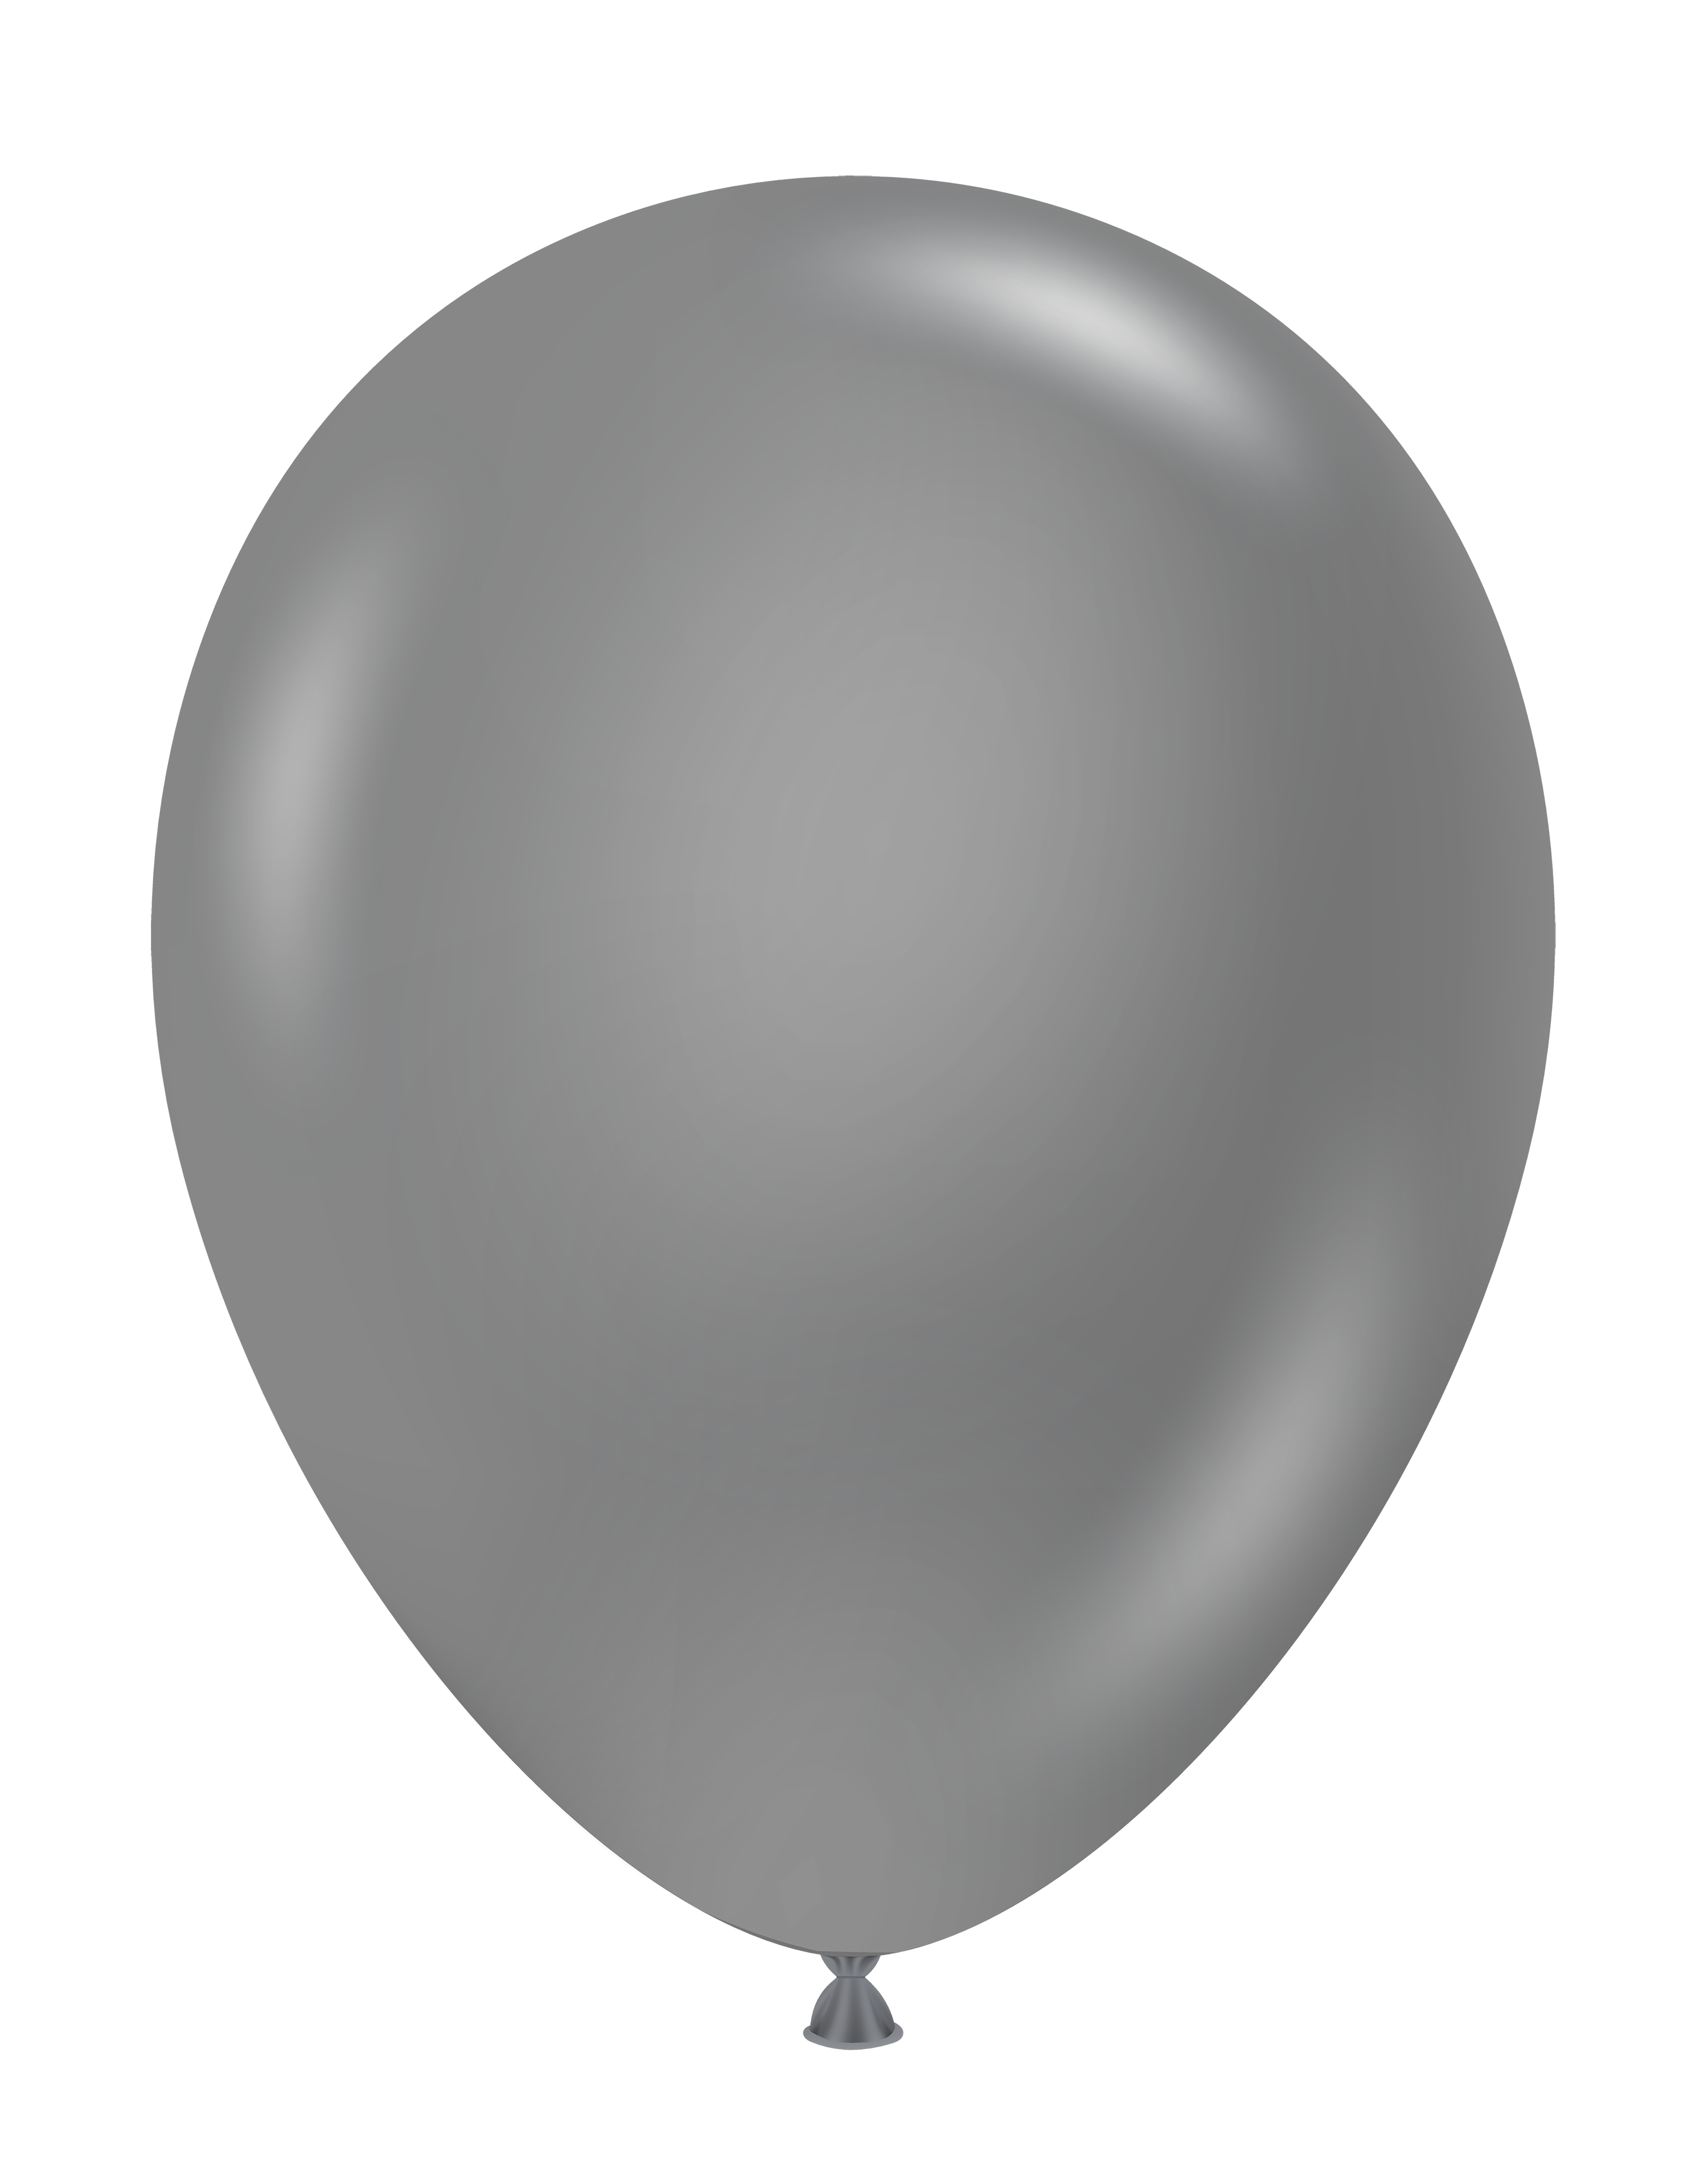 17" TUFTEX Metallic Pearlized Silver Latex Balloons | 50 Count